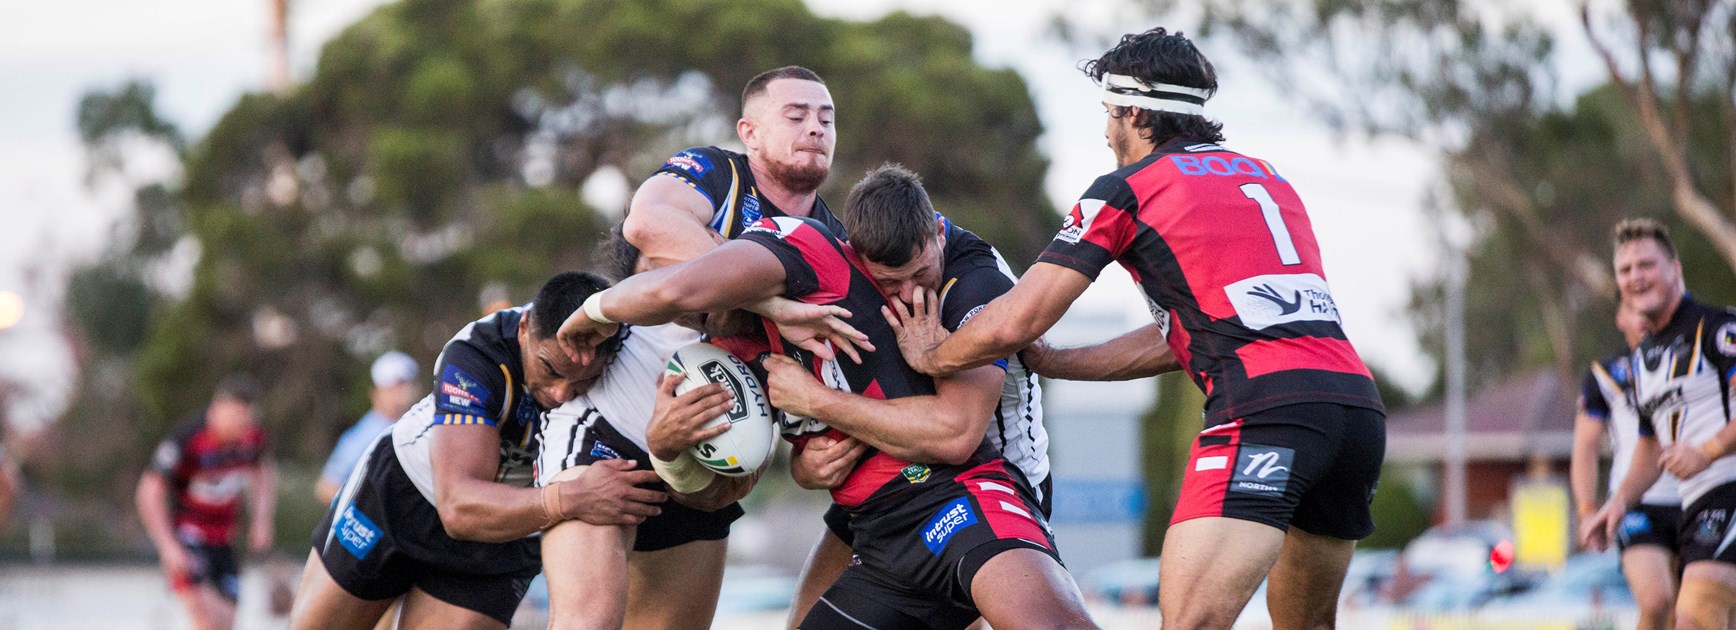 Magpies draw with Bears in preseason trial